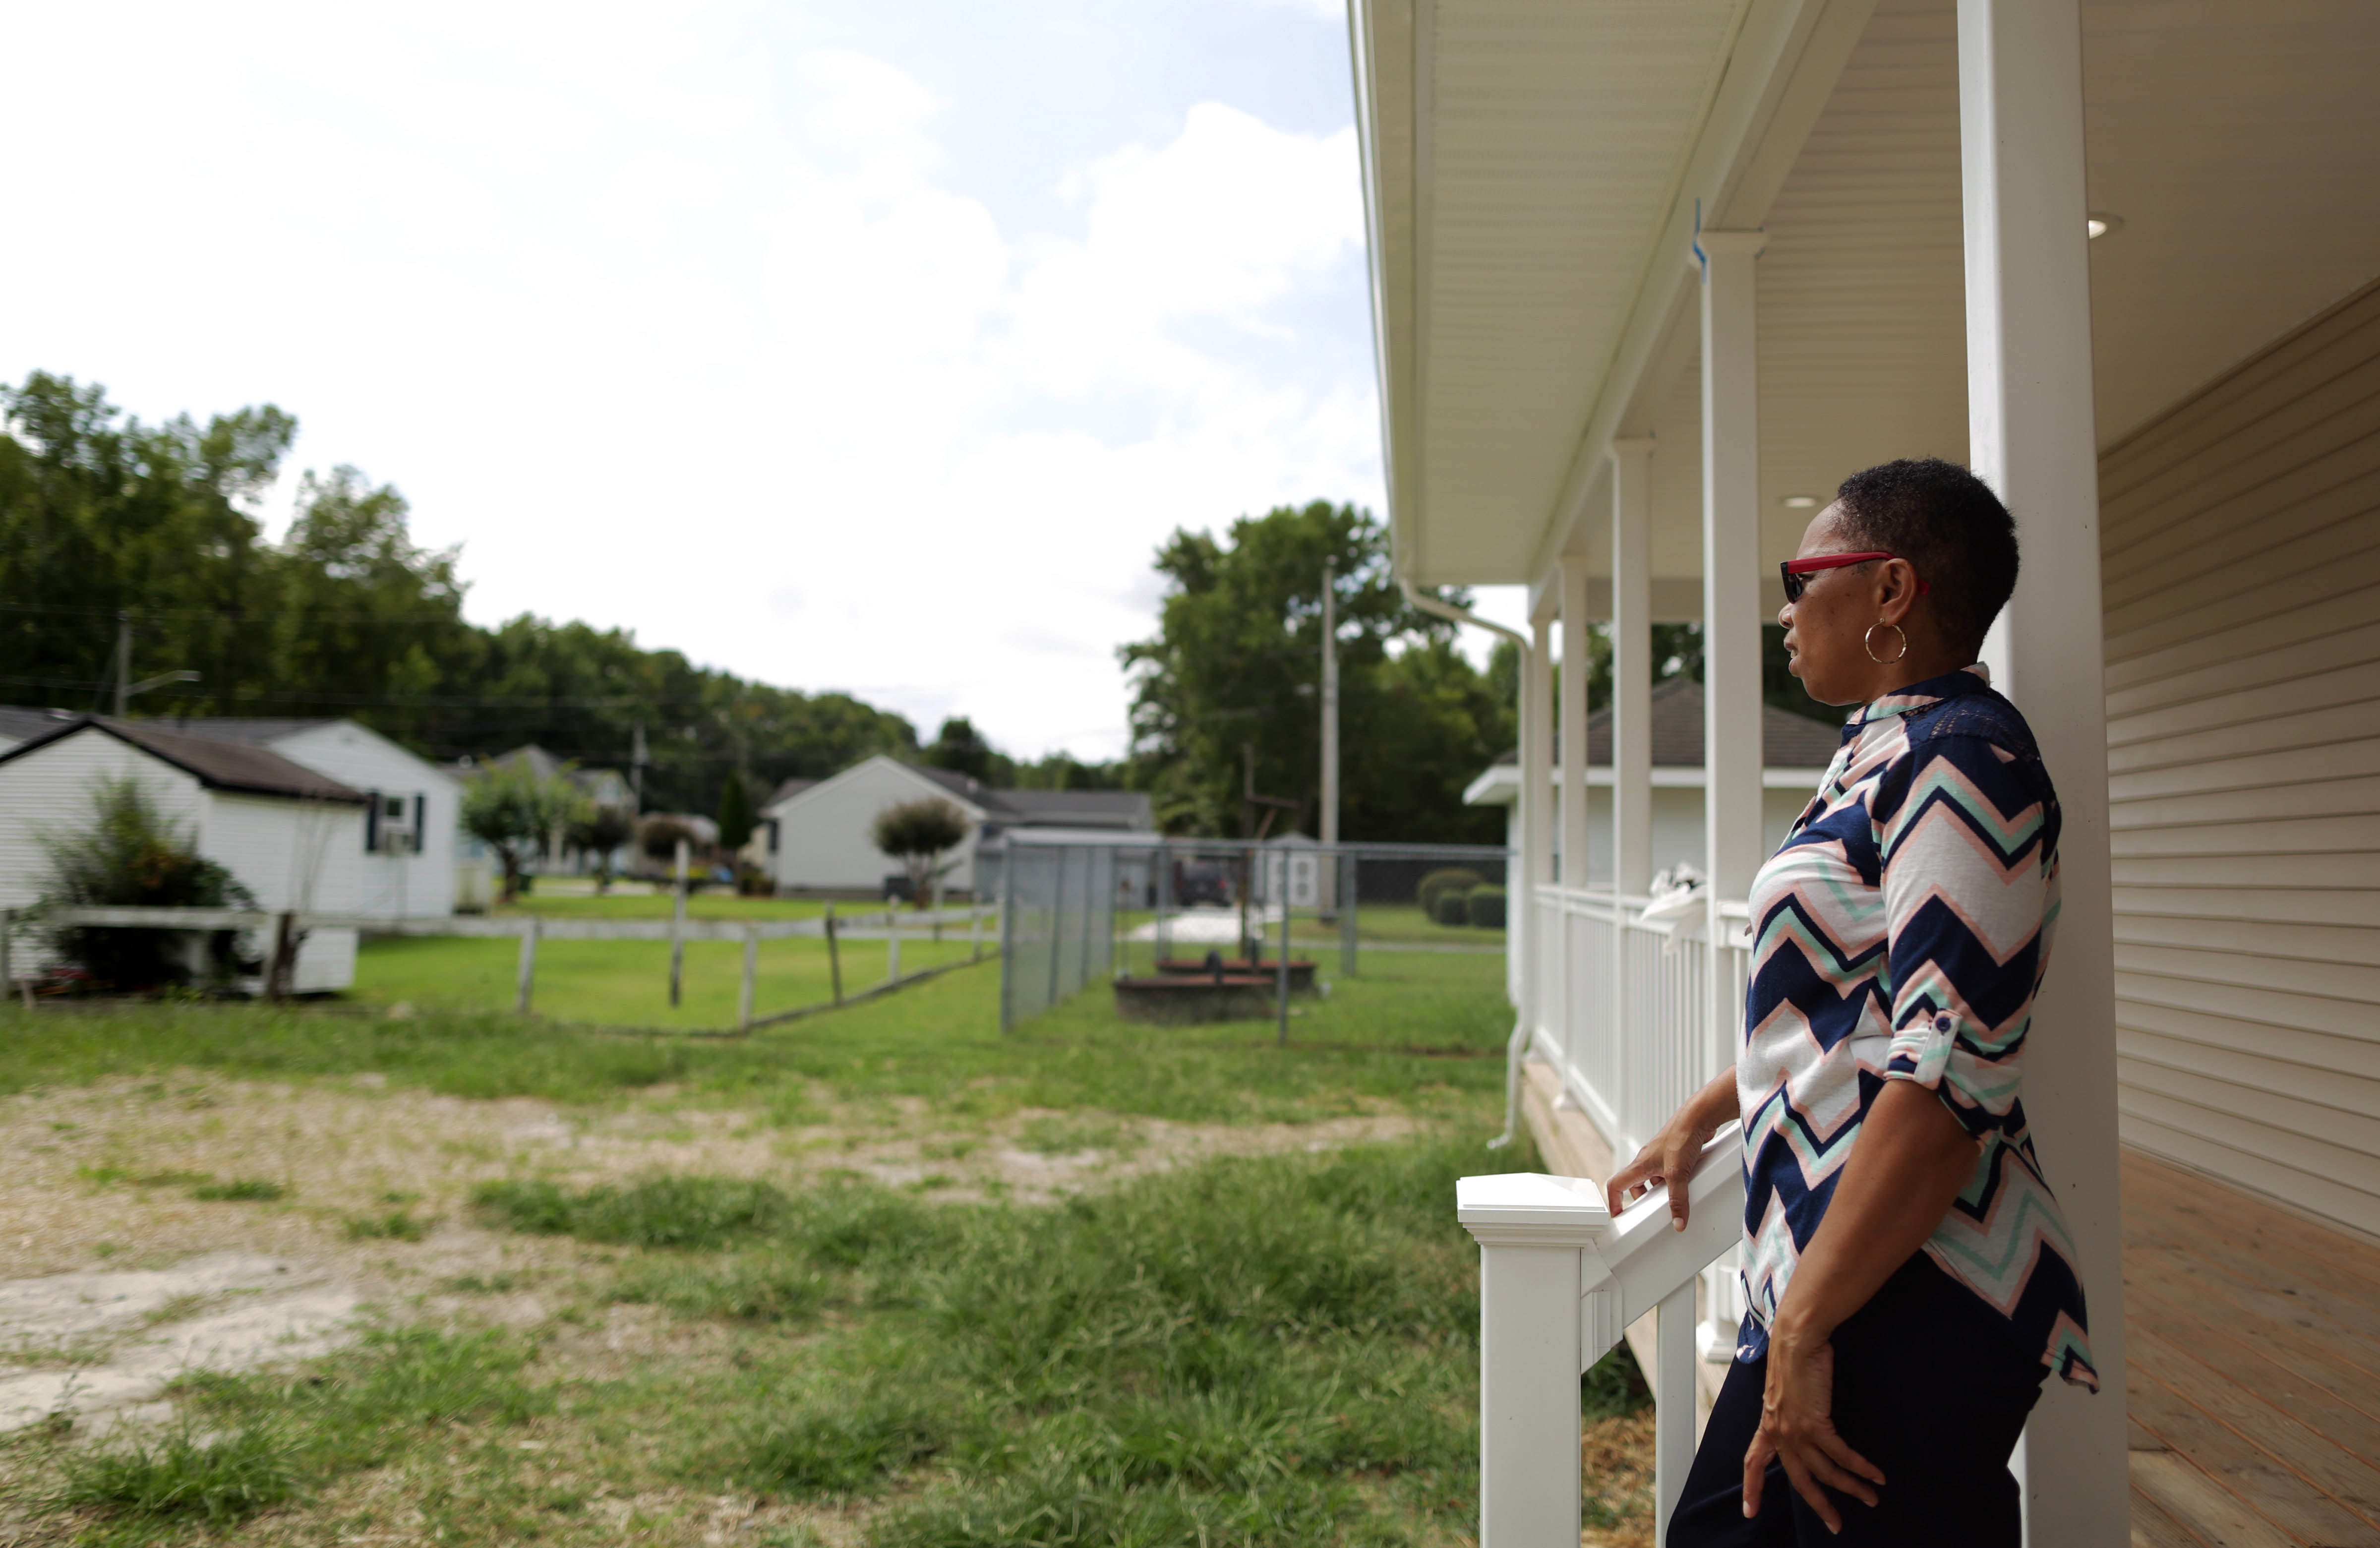 On Sept. 13, 2022, Alice Johnson looks over homes in the New Road Community, located in Exmore on VirginiaÕs Eastern Shore. Johnson moved to New Road when she was 19 and rented, but became a homeowner with the help of Ruth Wise. Wise and her family created the New Road Community Development Group in the early 90Õs, helping local families buy affordable homes - some on land their families had rented for generations.